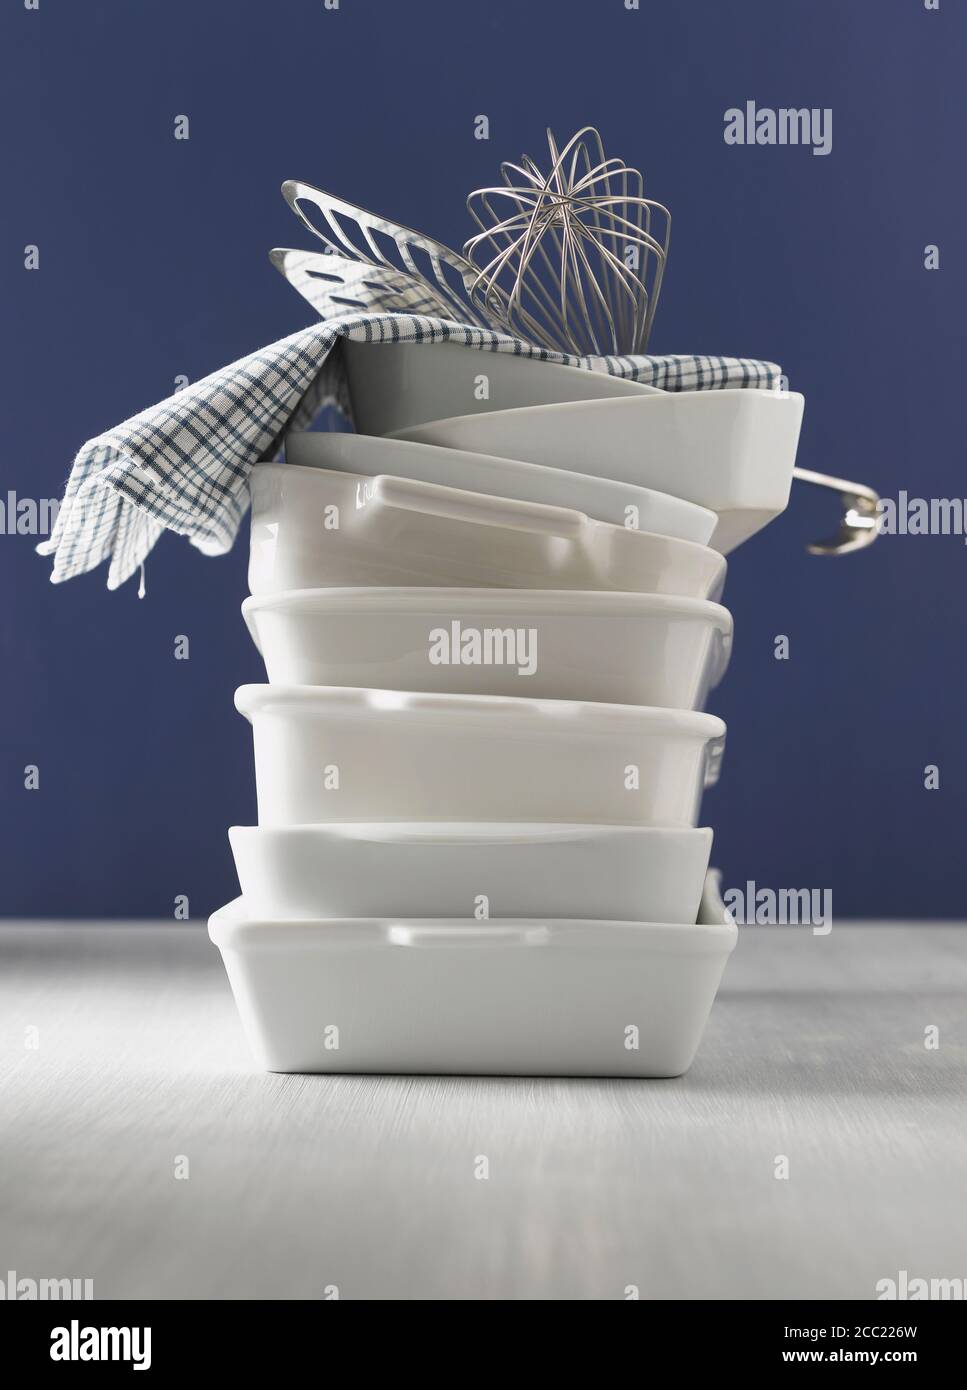 Stacked casseroles, dishcloth, eggbeater and fish slice Stock Photo